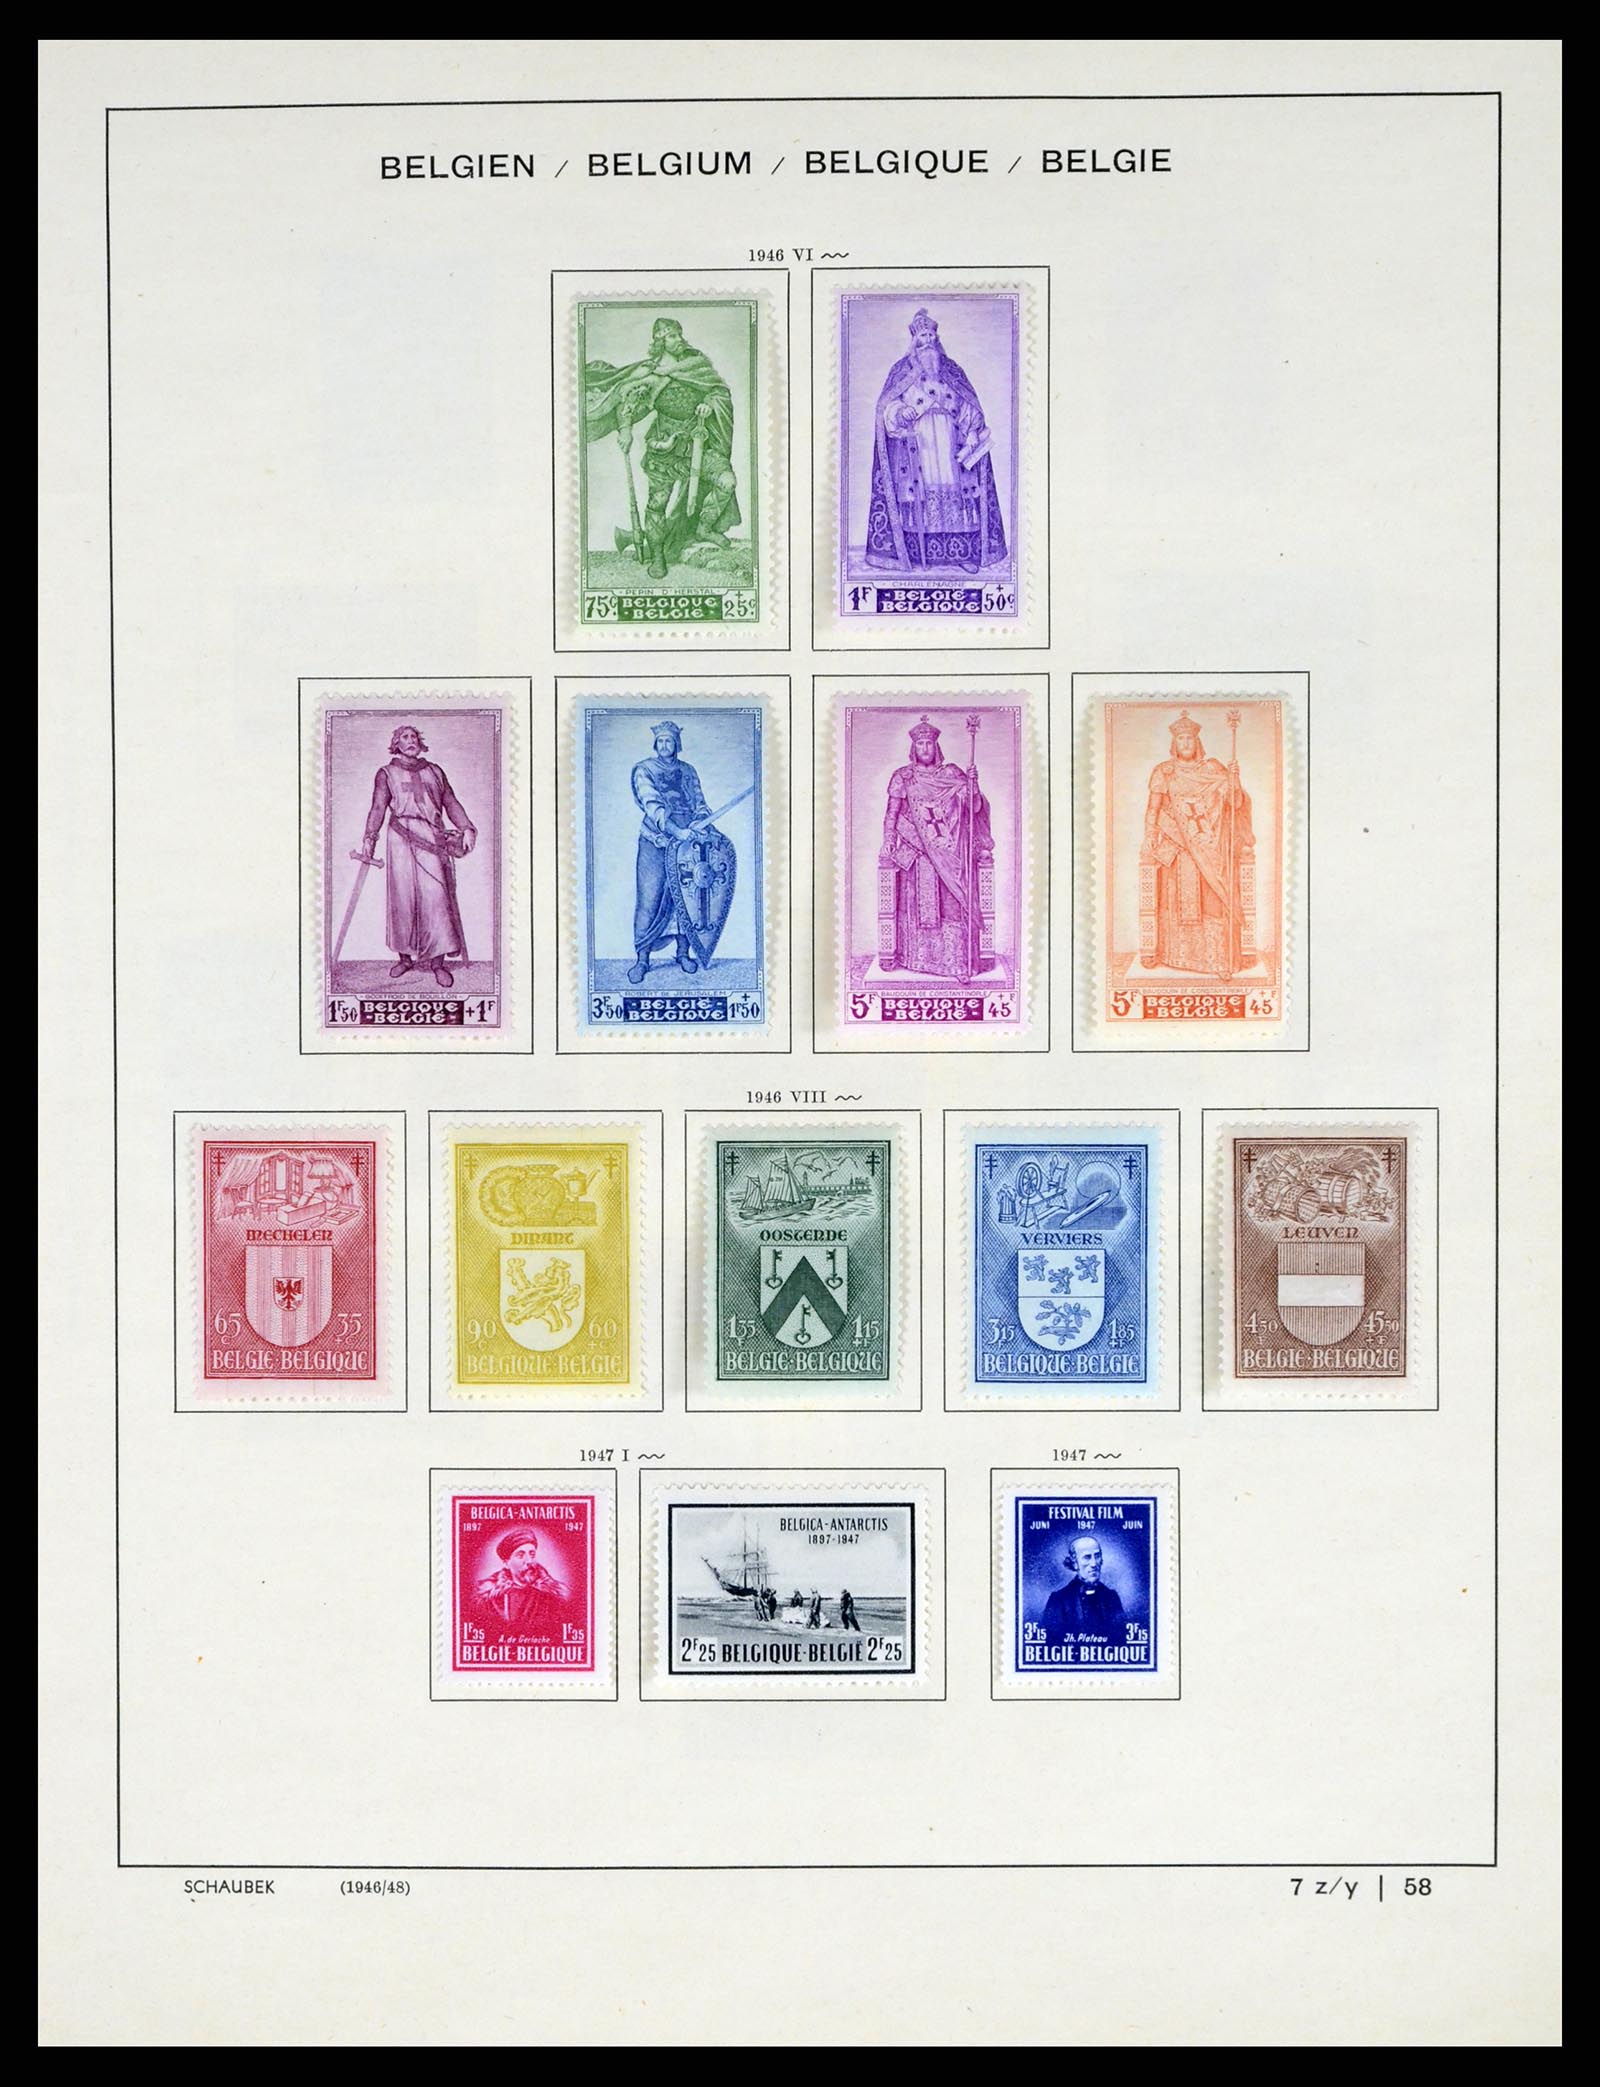 37595 065 - Stamp collection 37595 Super collection Belgium 1849-2015!